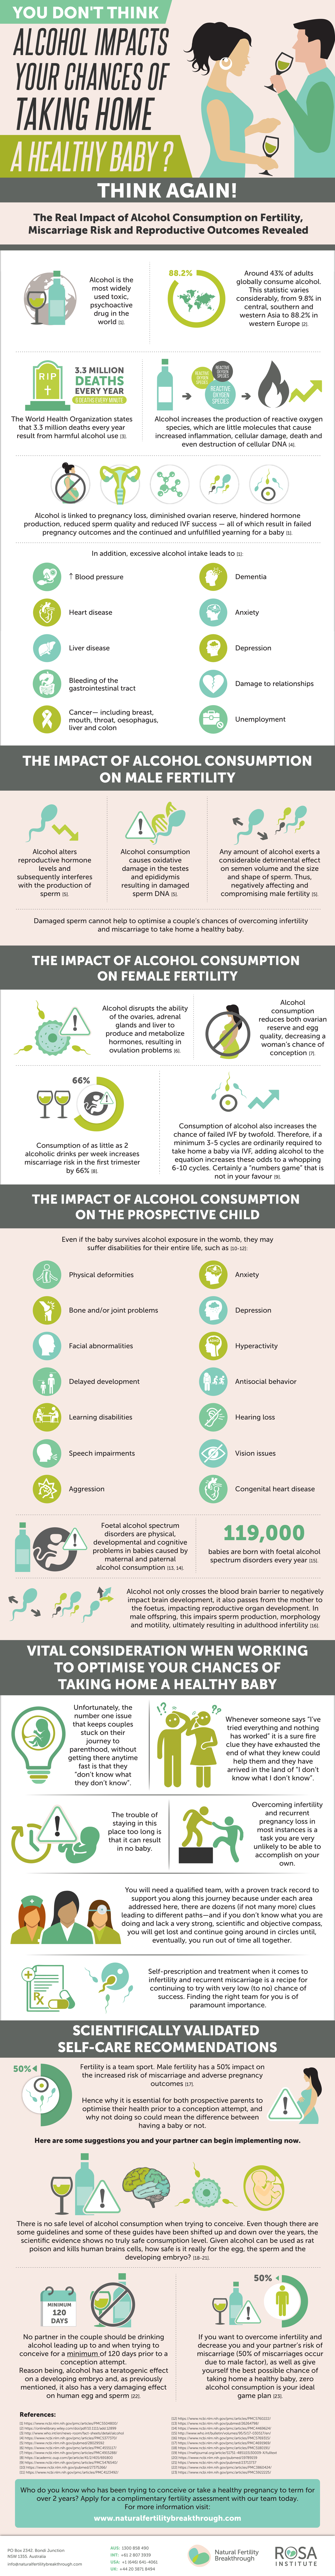 Alcohol Infographic Final 080419 01